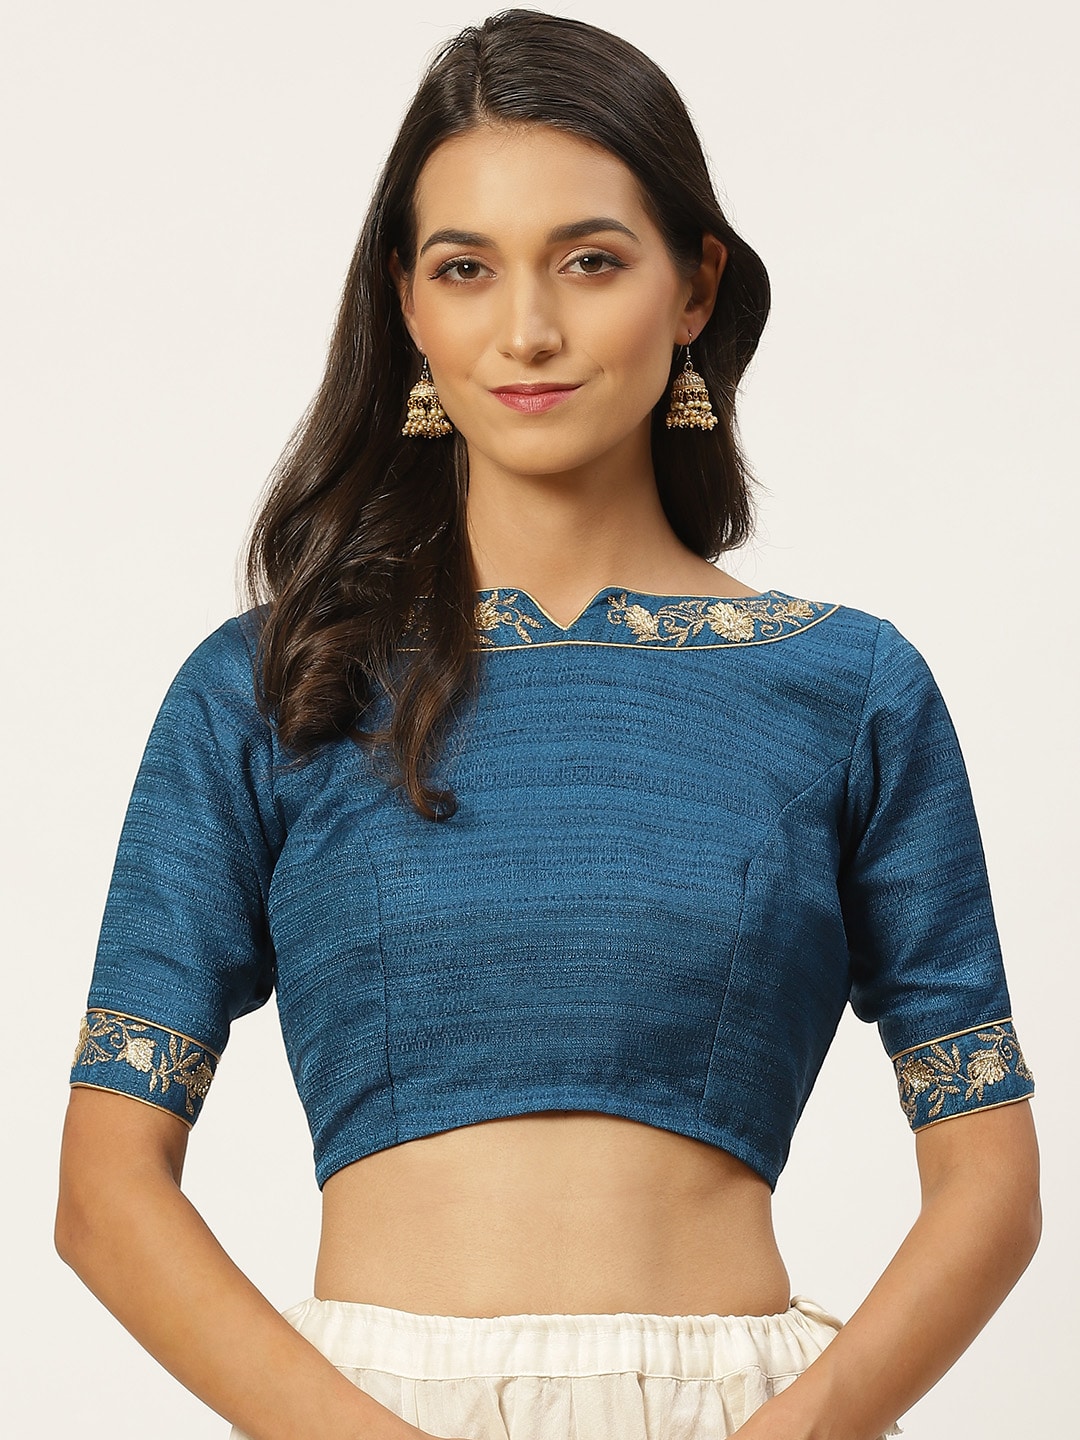 Studio Shringaar Women Blue & Golden Solid Blouse With Embroidered Detail Price in India